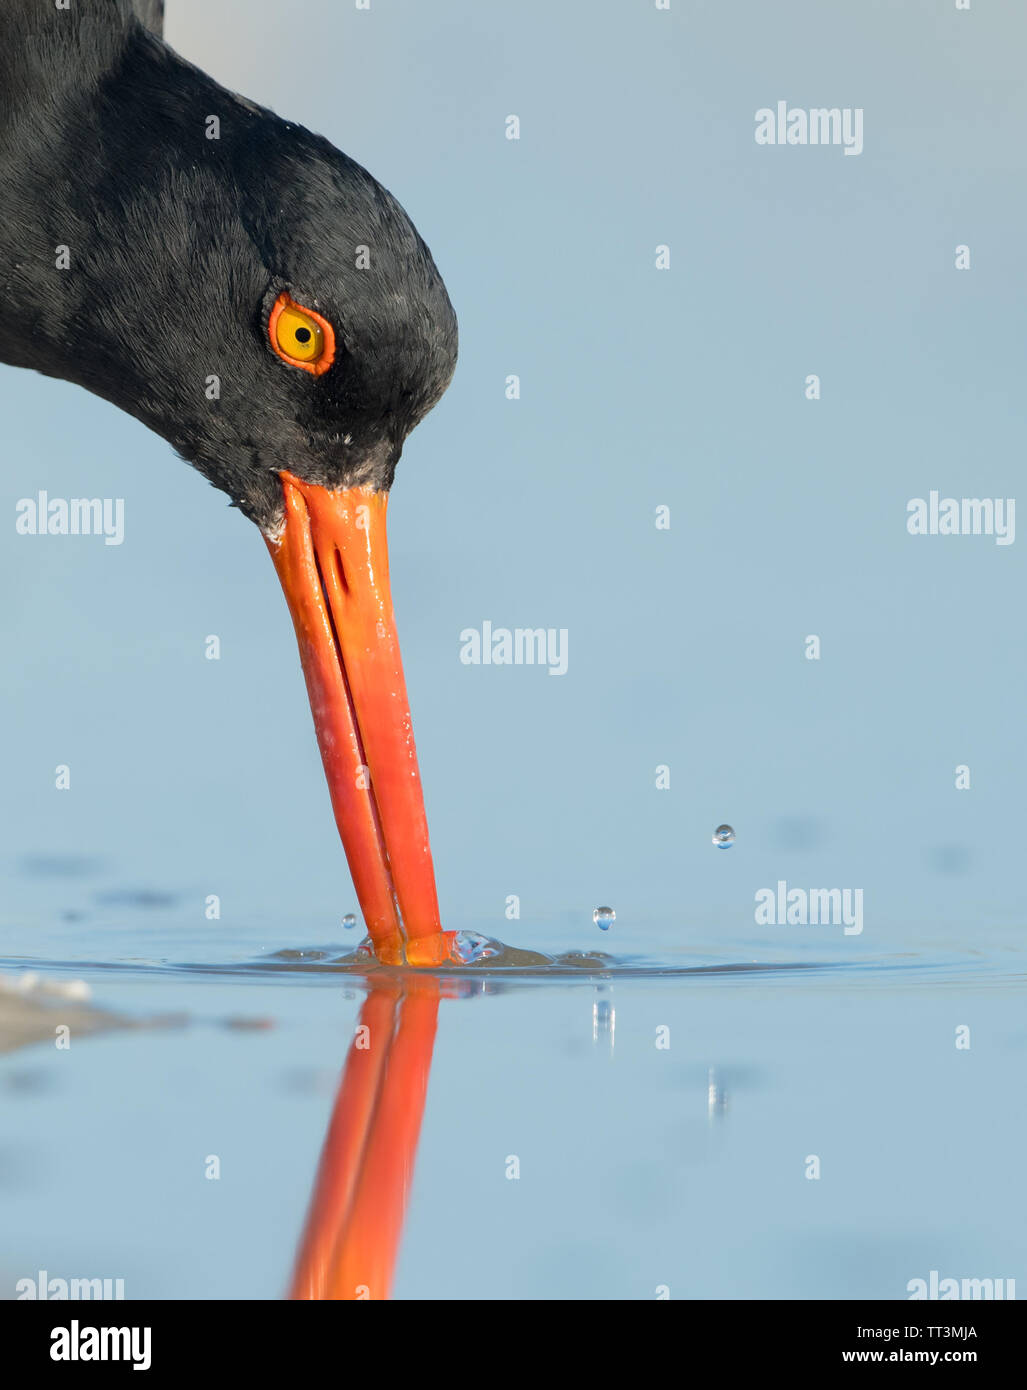 A close up head shot and reflection of American oystercatcher (Haematopus palliatus), feeding on beach, USA, Florida, with beak in water Stock Photo